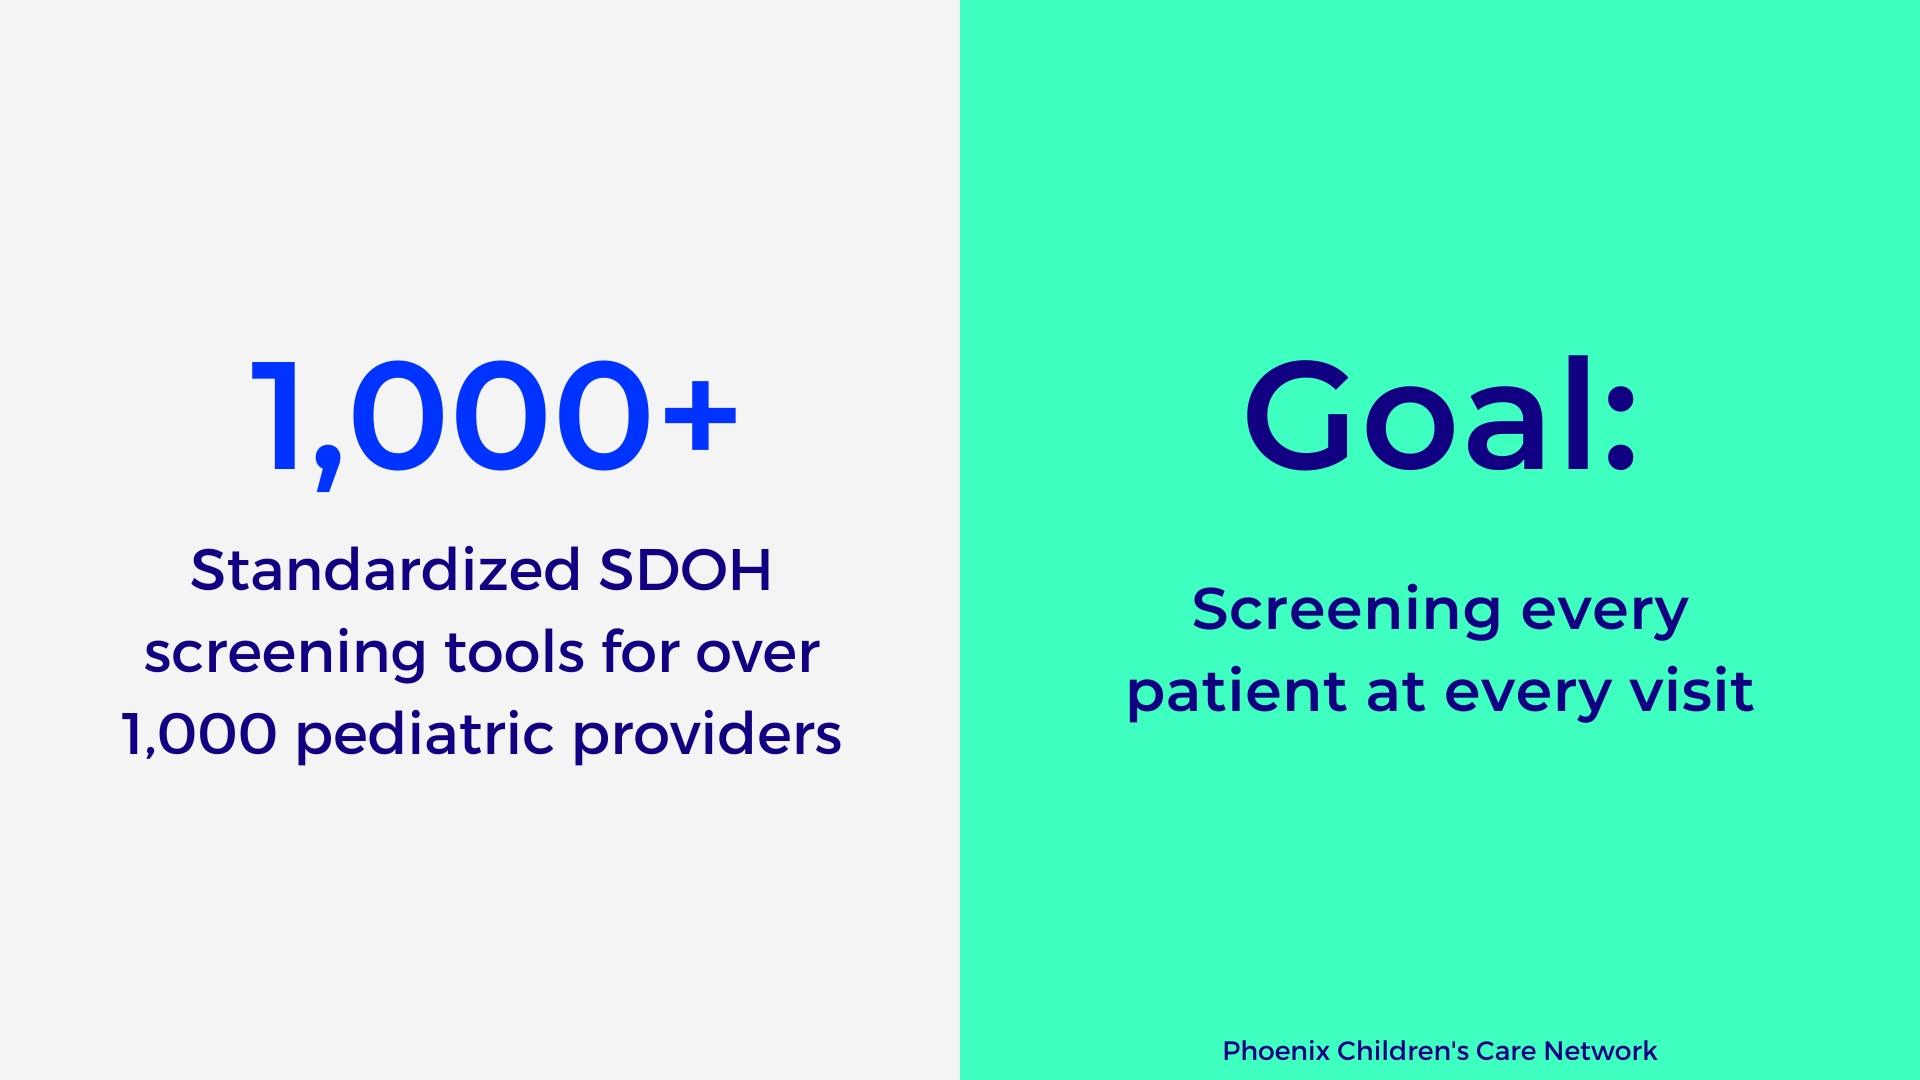 1,000 pediatric providers used a comprehensive set of SDOH tools to screen patients